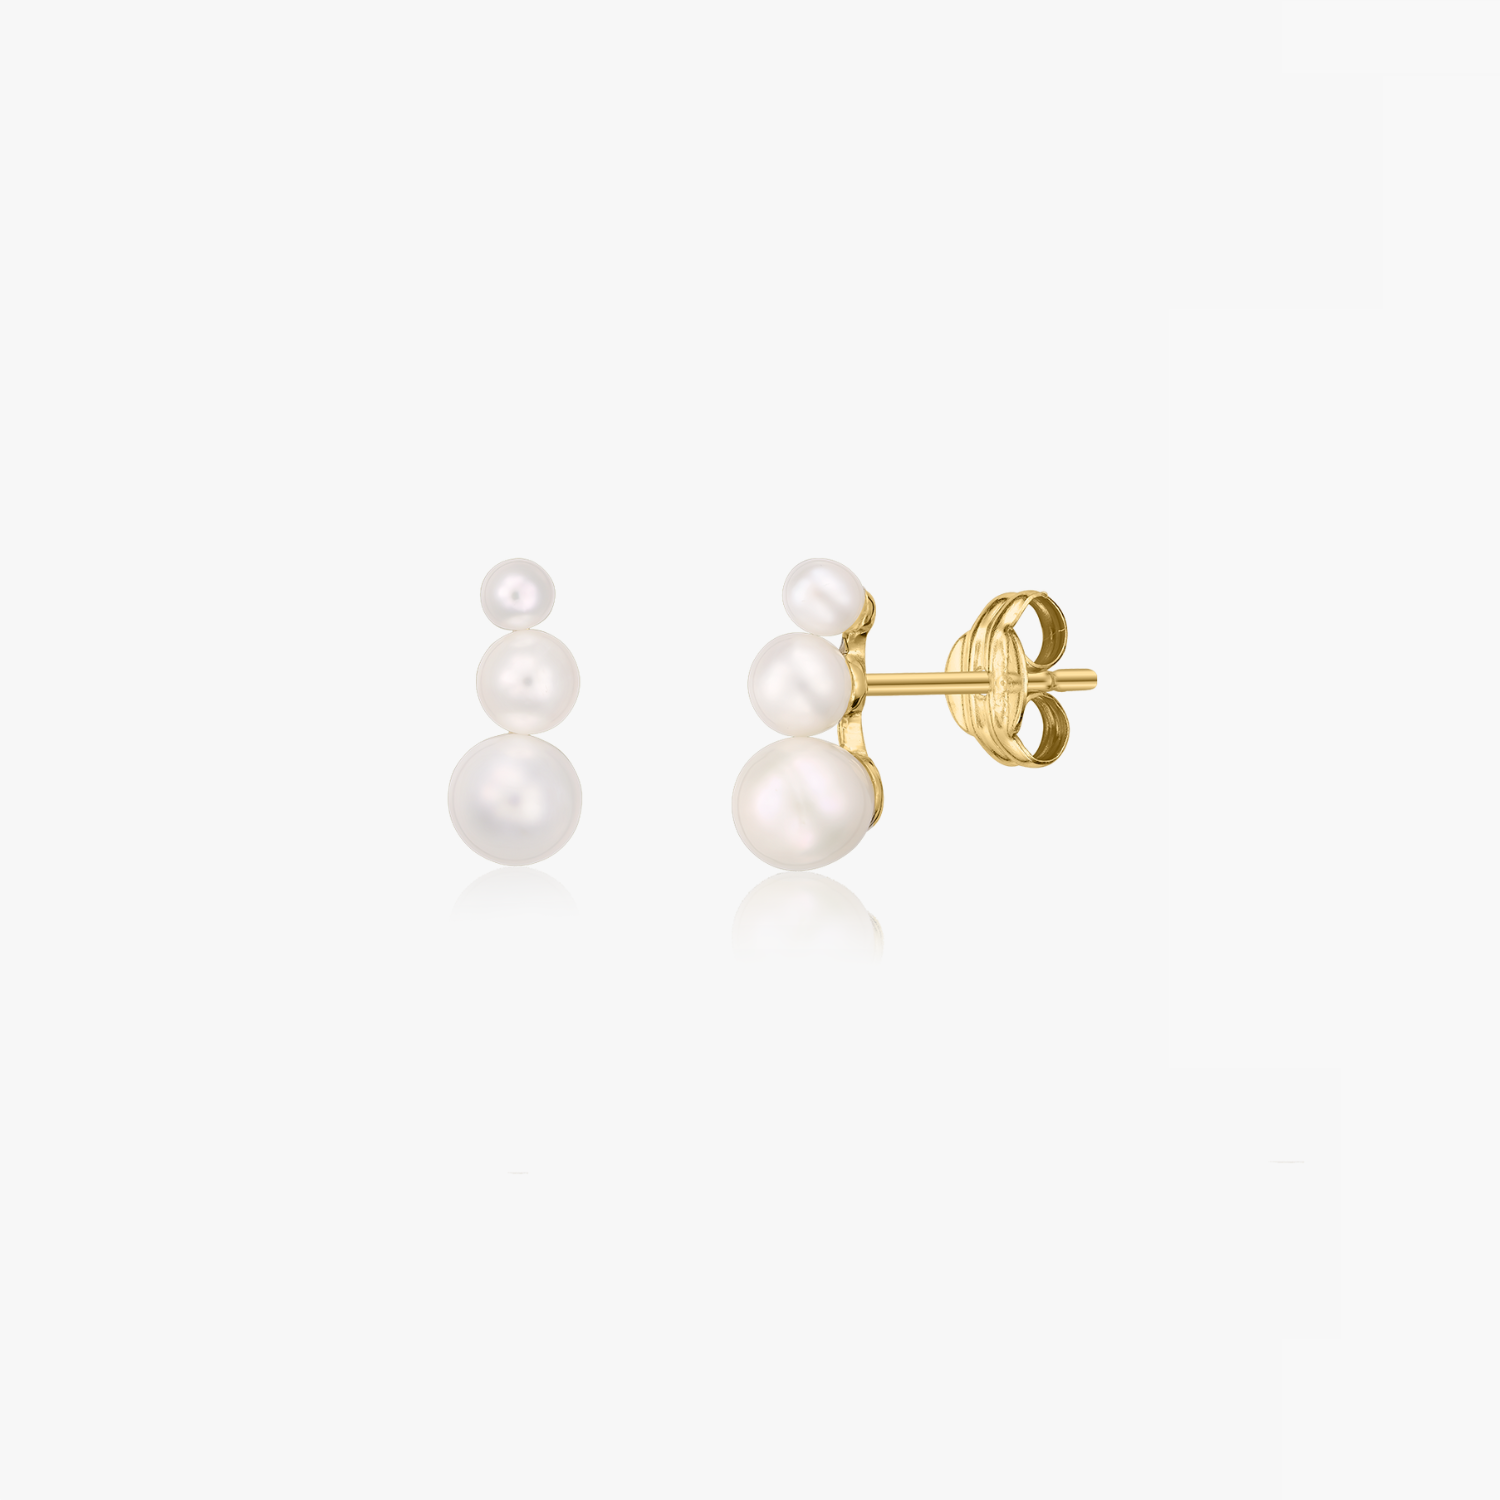 Tiny Pearls gold earrings